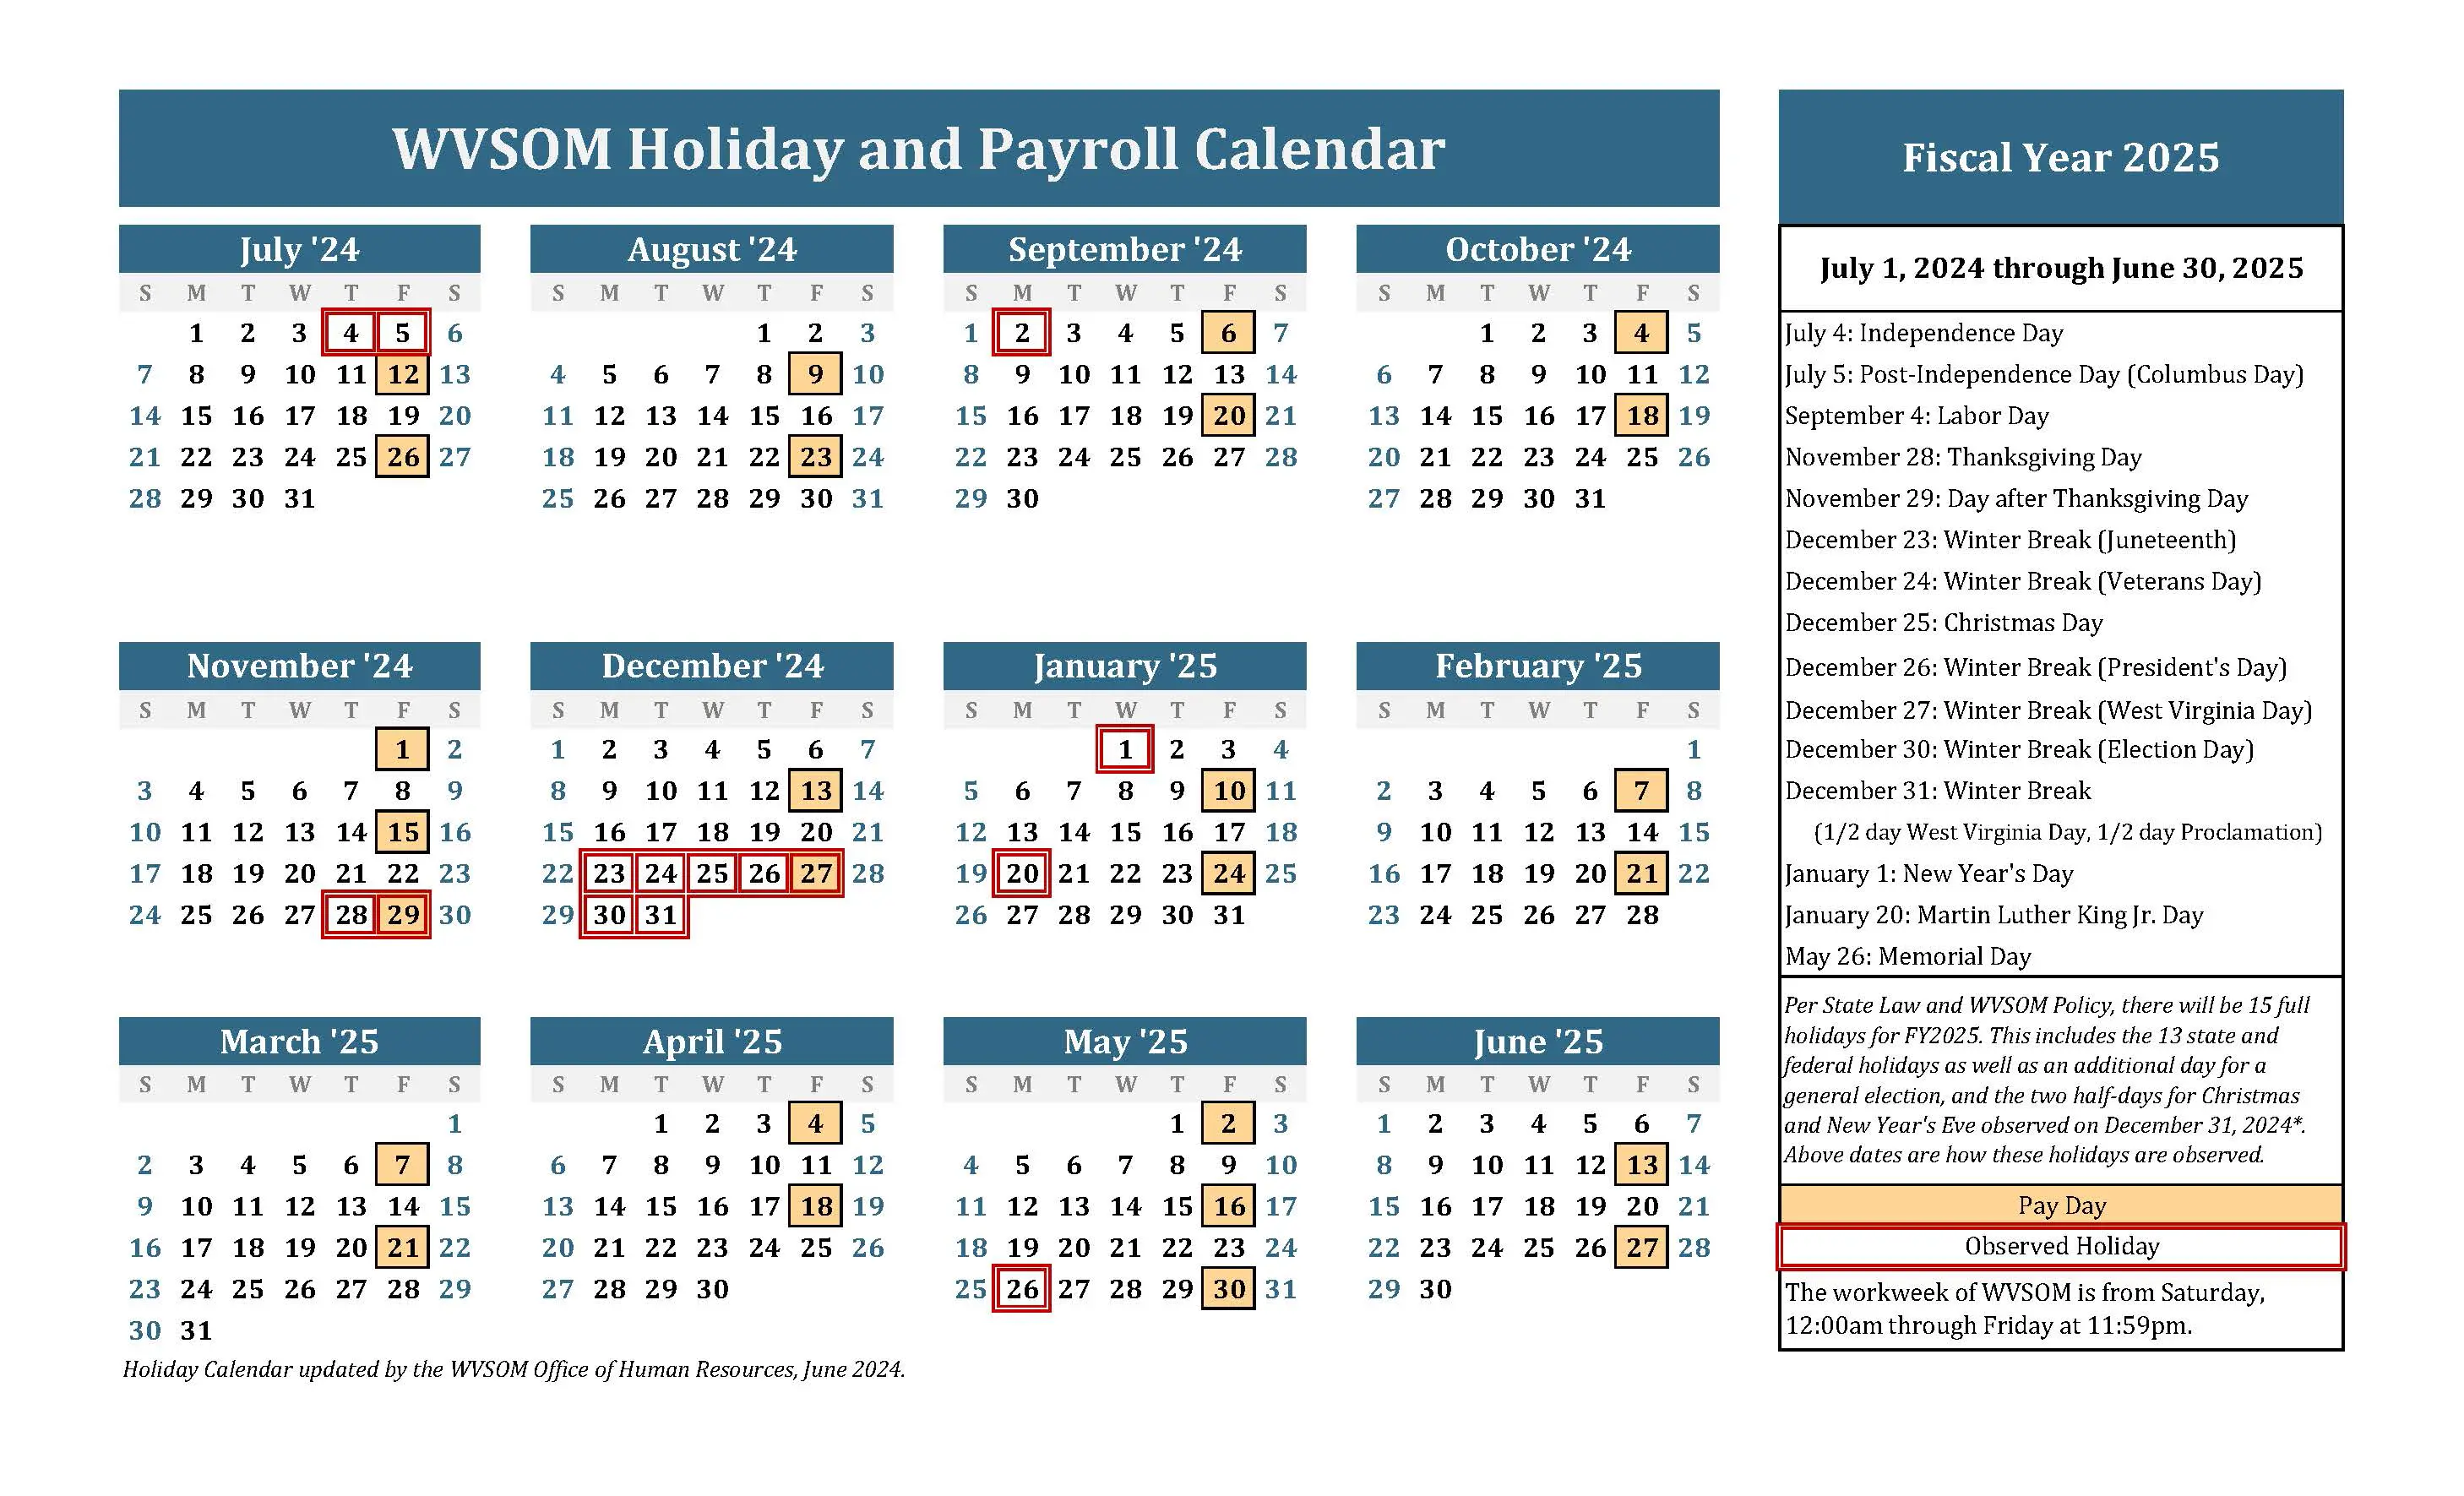 Yearly calendar showing pay dates and holidays highlighted